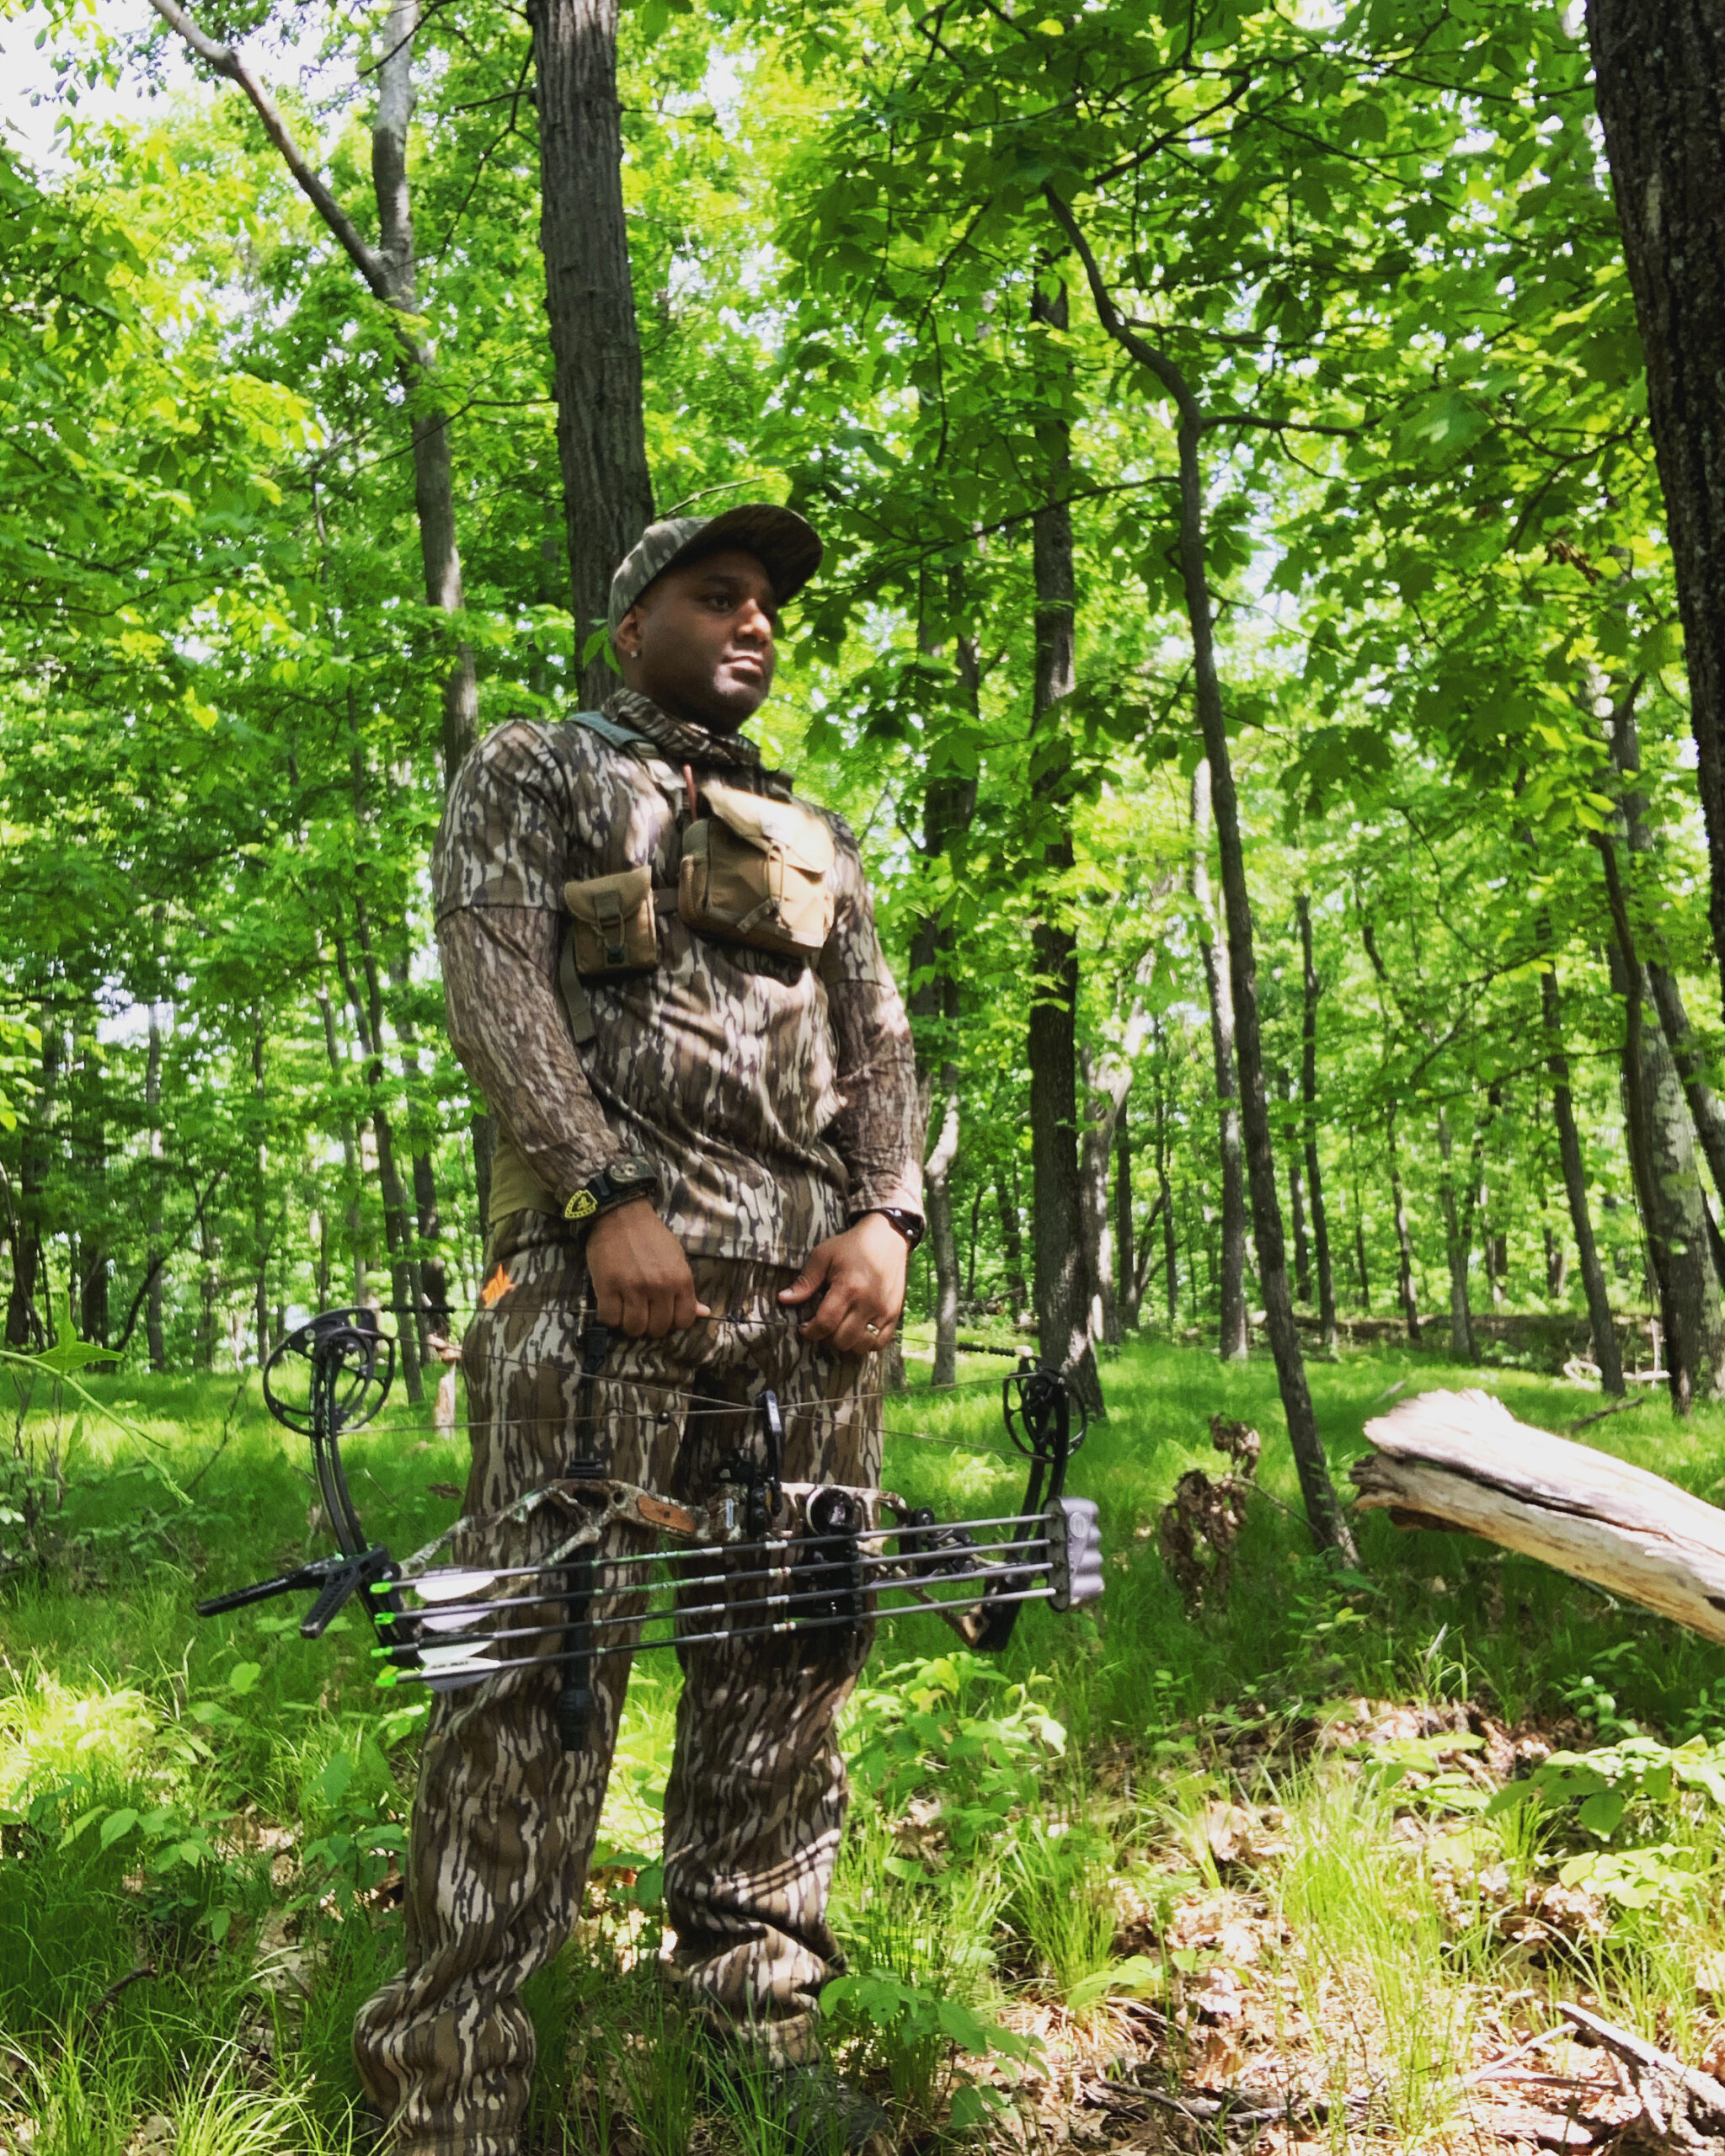 Bowhunting turkeys can be tough without a hunting mentor to help you.